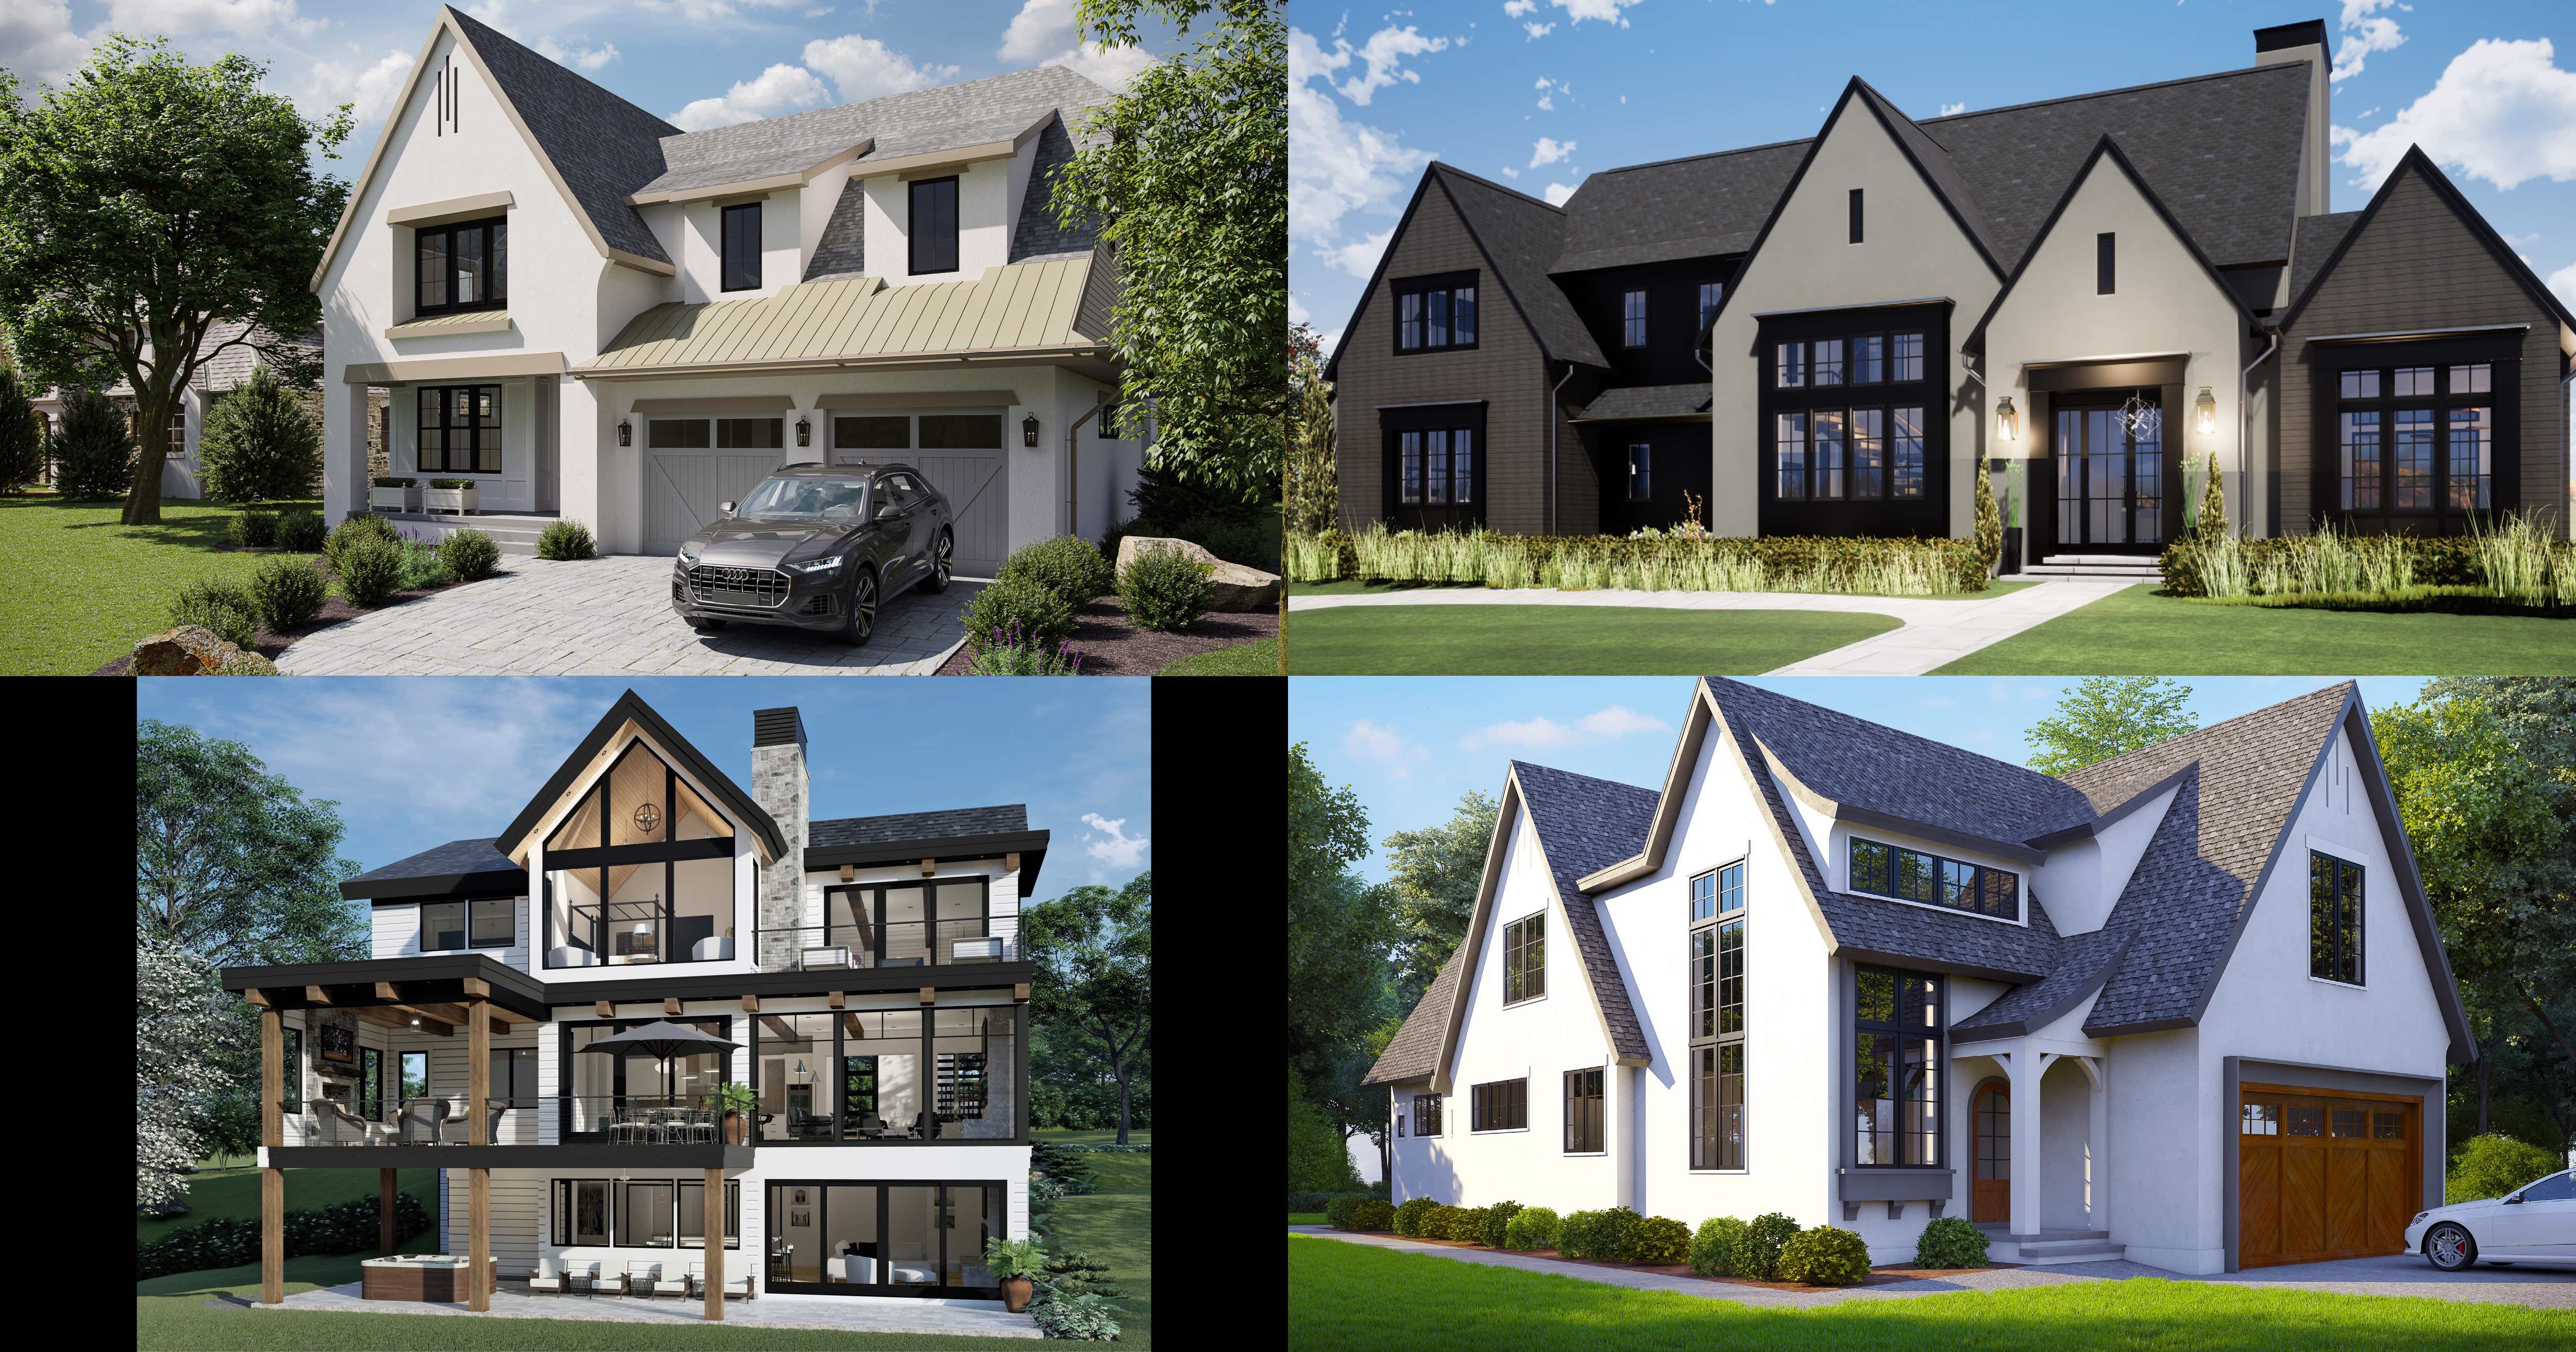 Image for Four Dream Homes on the Spring Parade of Homes Benefit the Housing First Minnesota Foundation